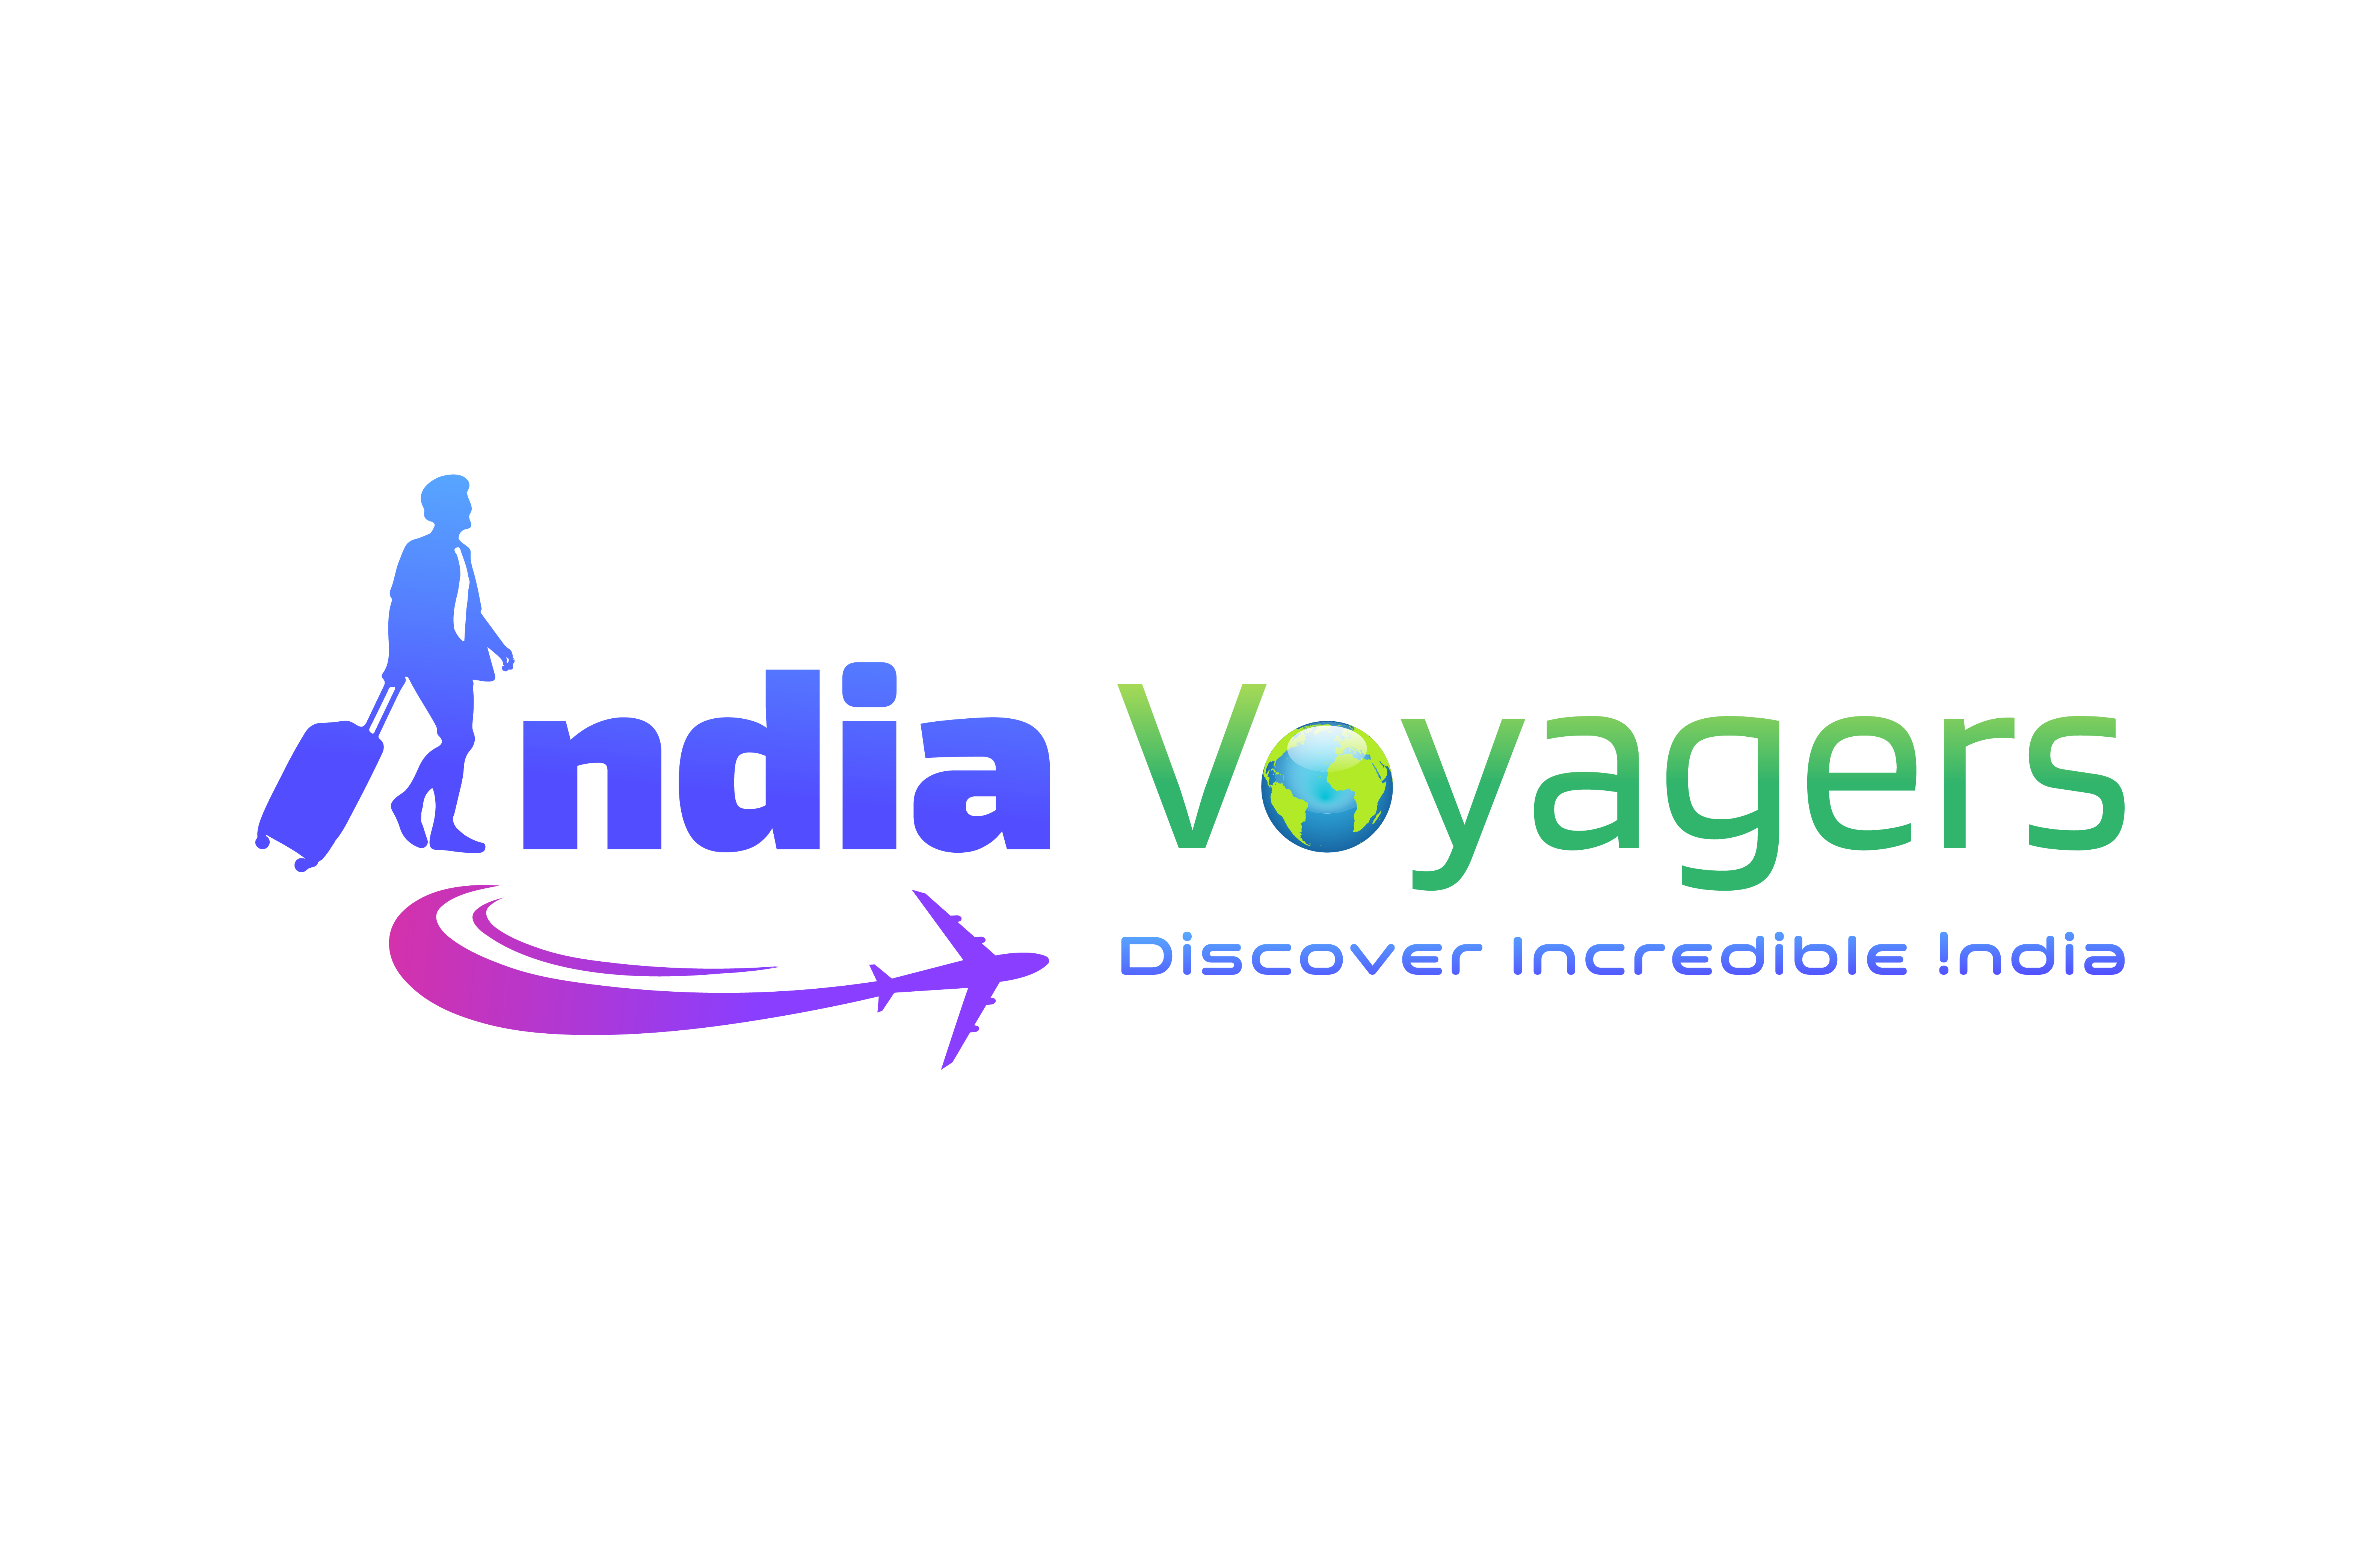 India Voyagers